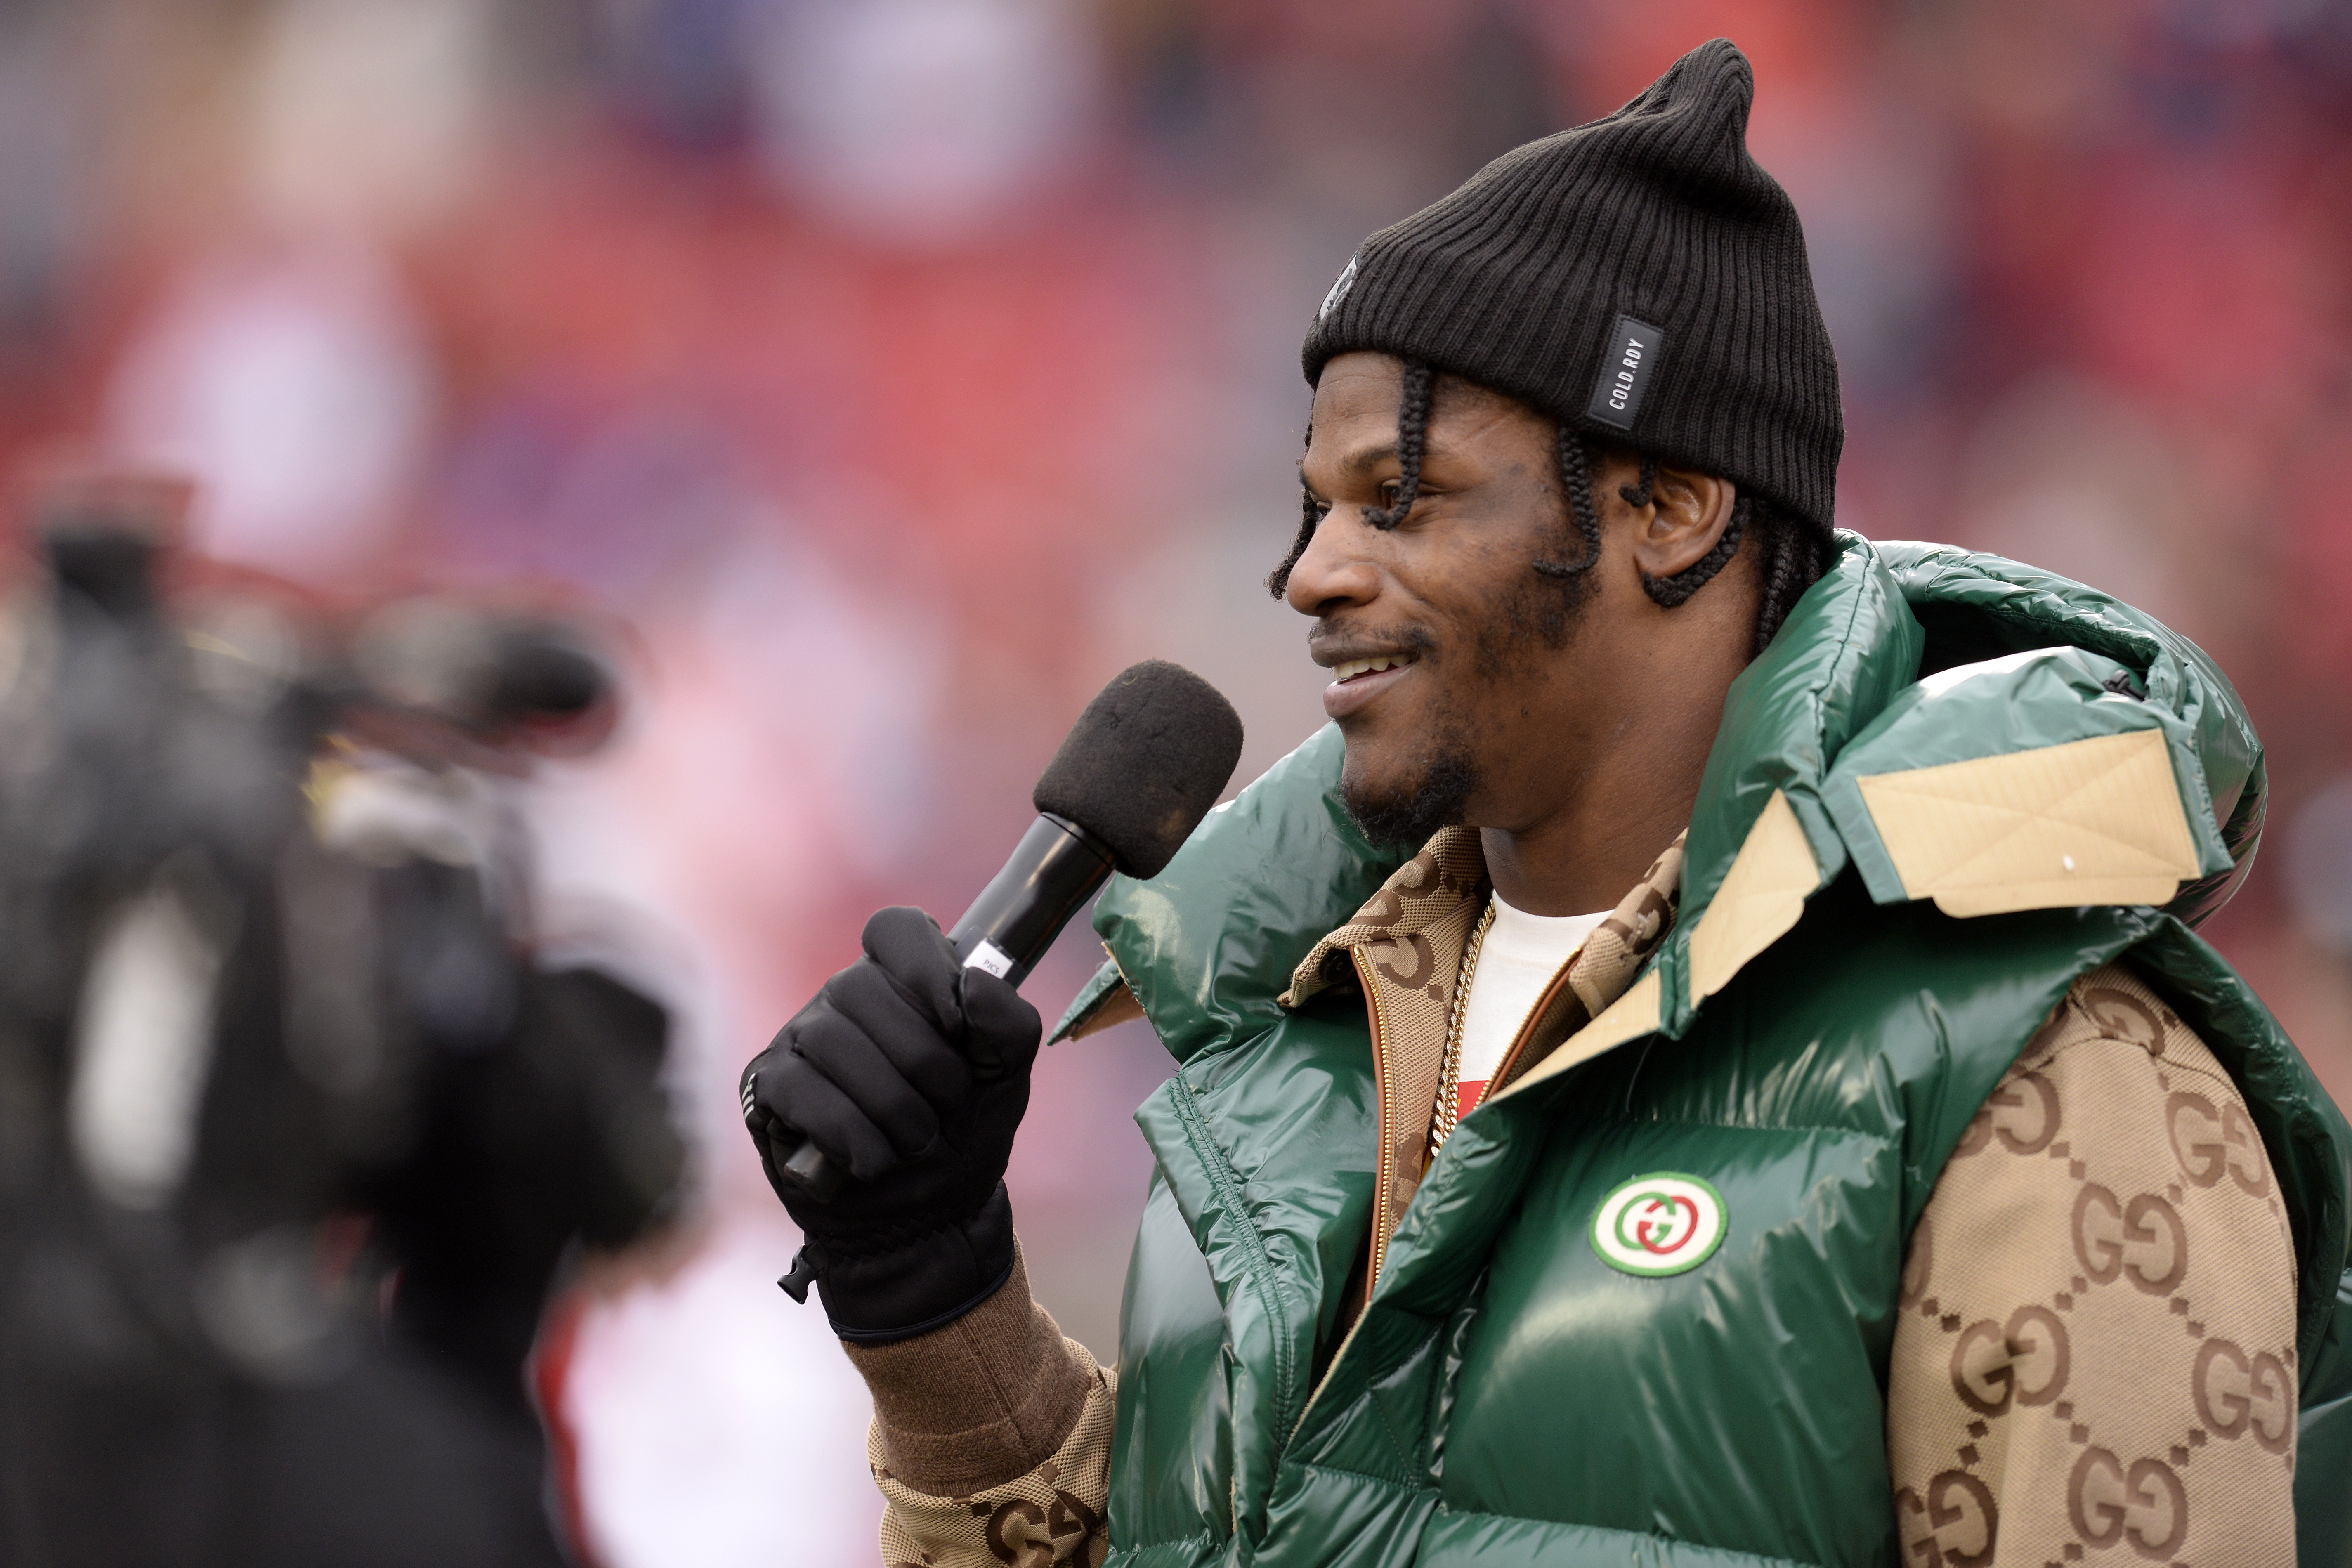 Lamar Jackson speaks to the crowd during a jersey retirement ceremony at Cardinal Stadium in Louisville, Kentucky, on November 13, 2021. | Source: Getty Images